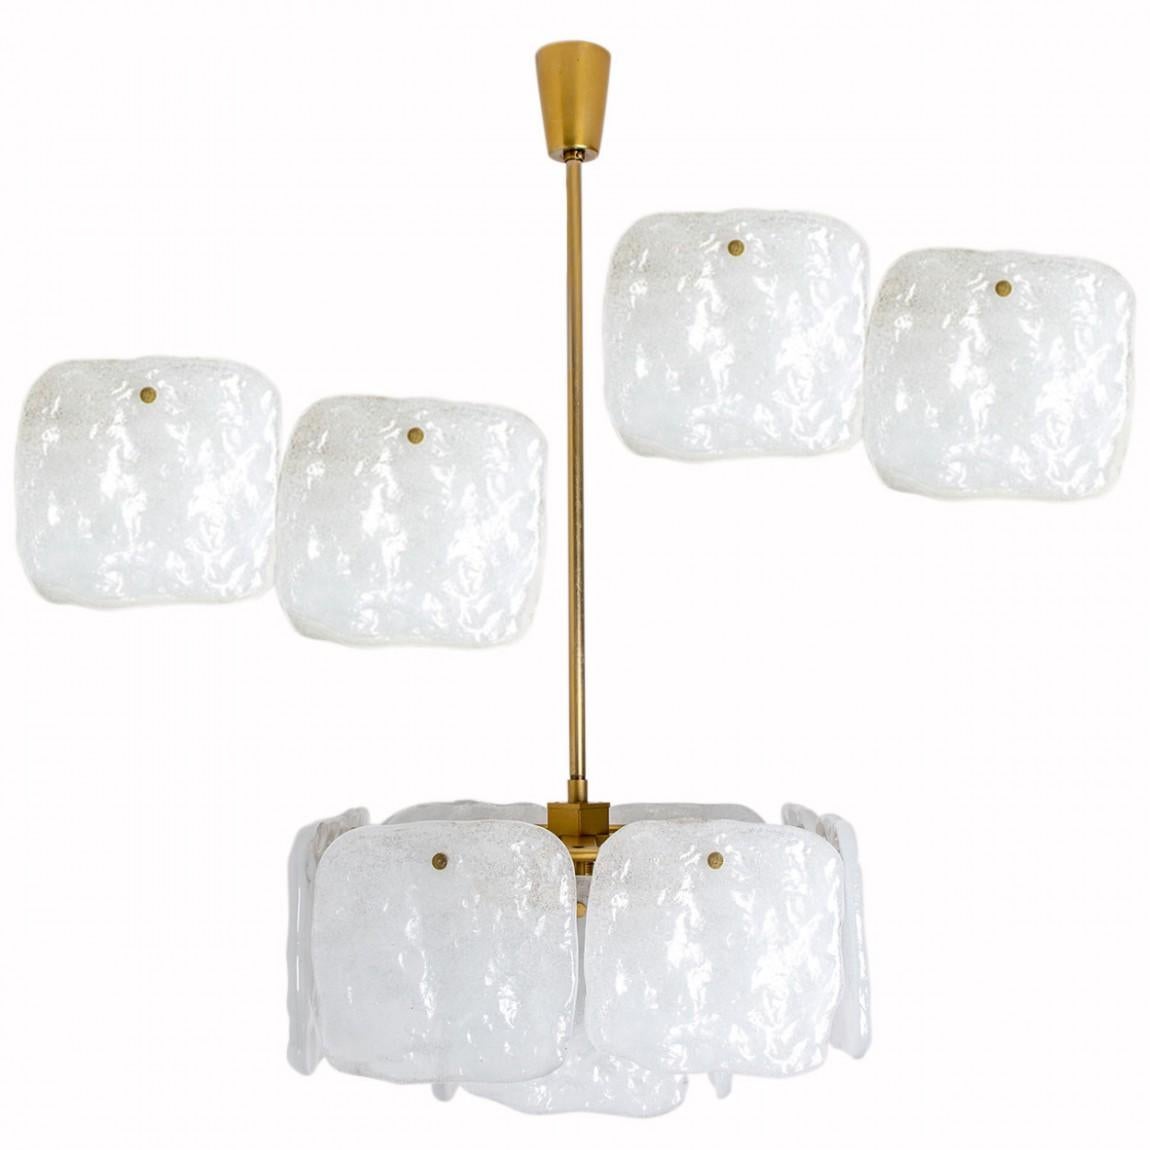 A stunning set of light fixtures designed by J.T Kalmar, manufactured by Kalmar Franken, Austria in the 1960s.
High-end and handmade design from the 20th century. The large squares of white, opaque textured glass shades provides a nicely diffuse